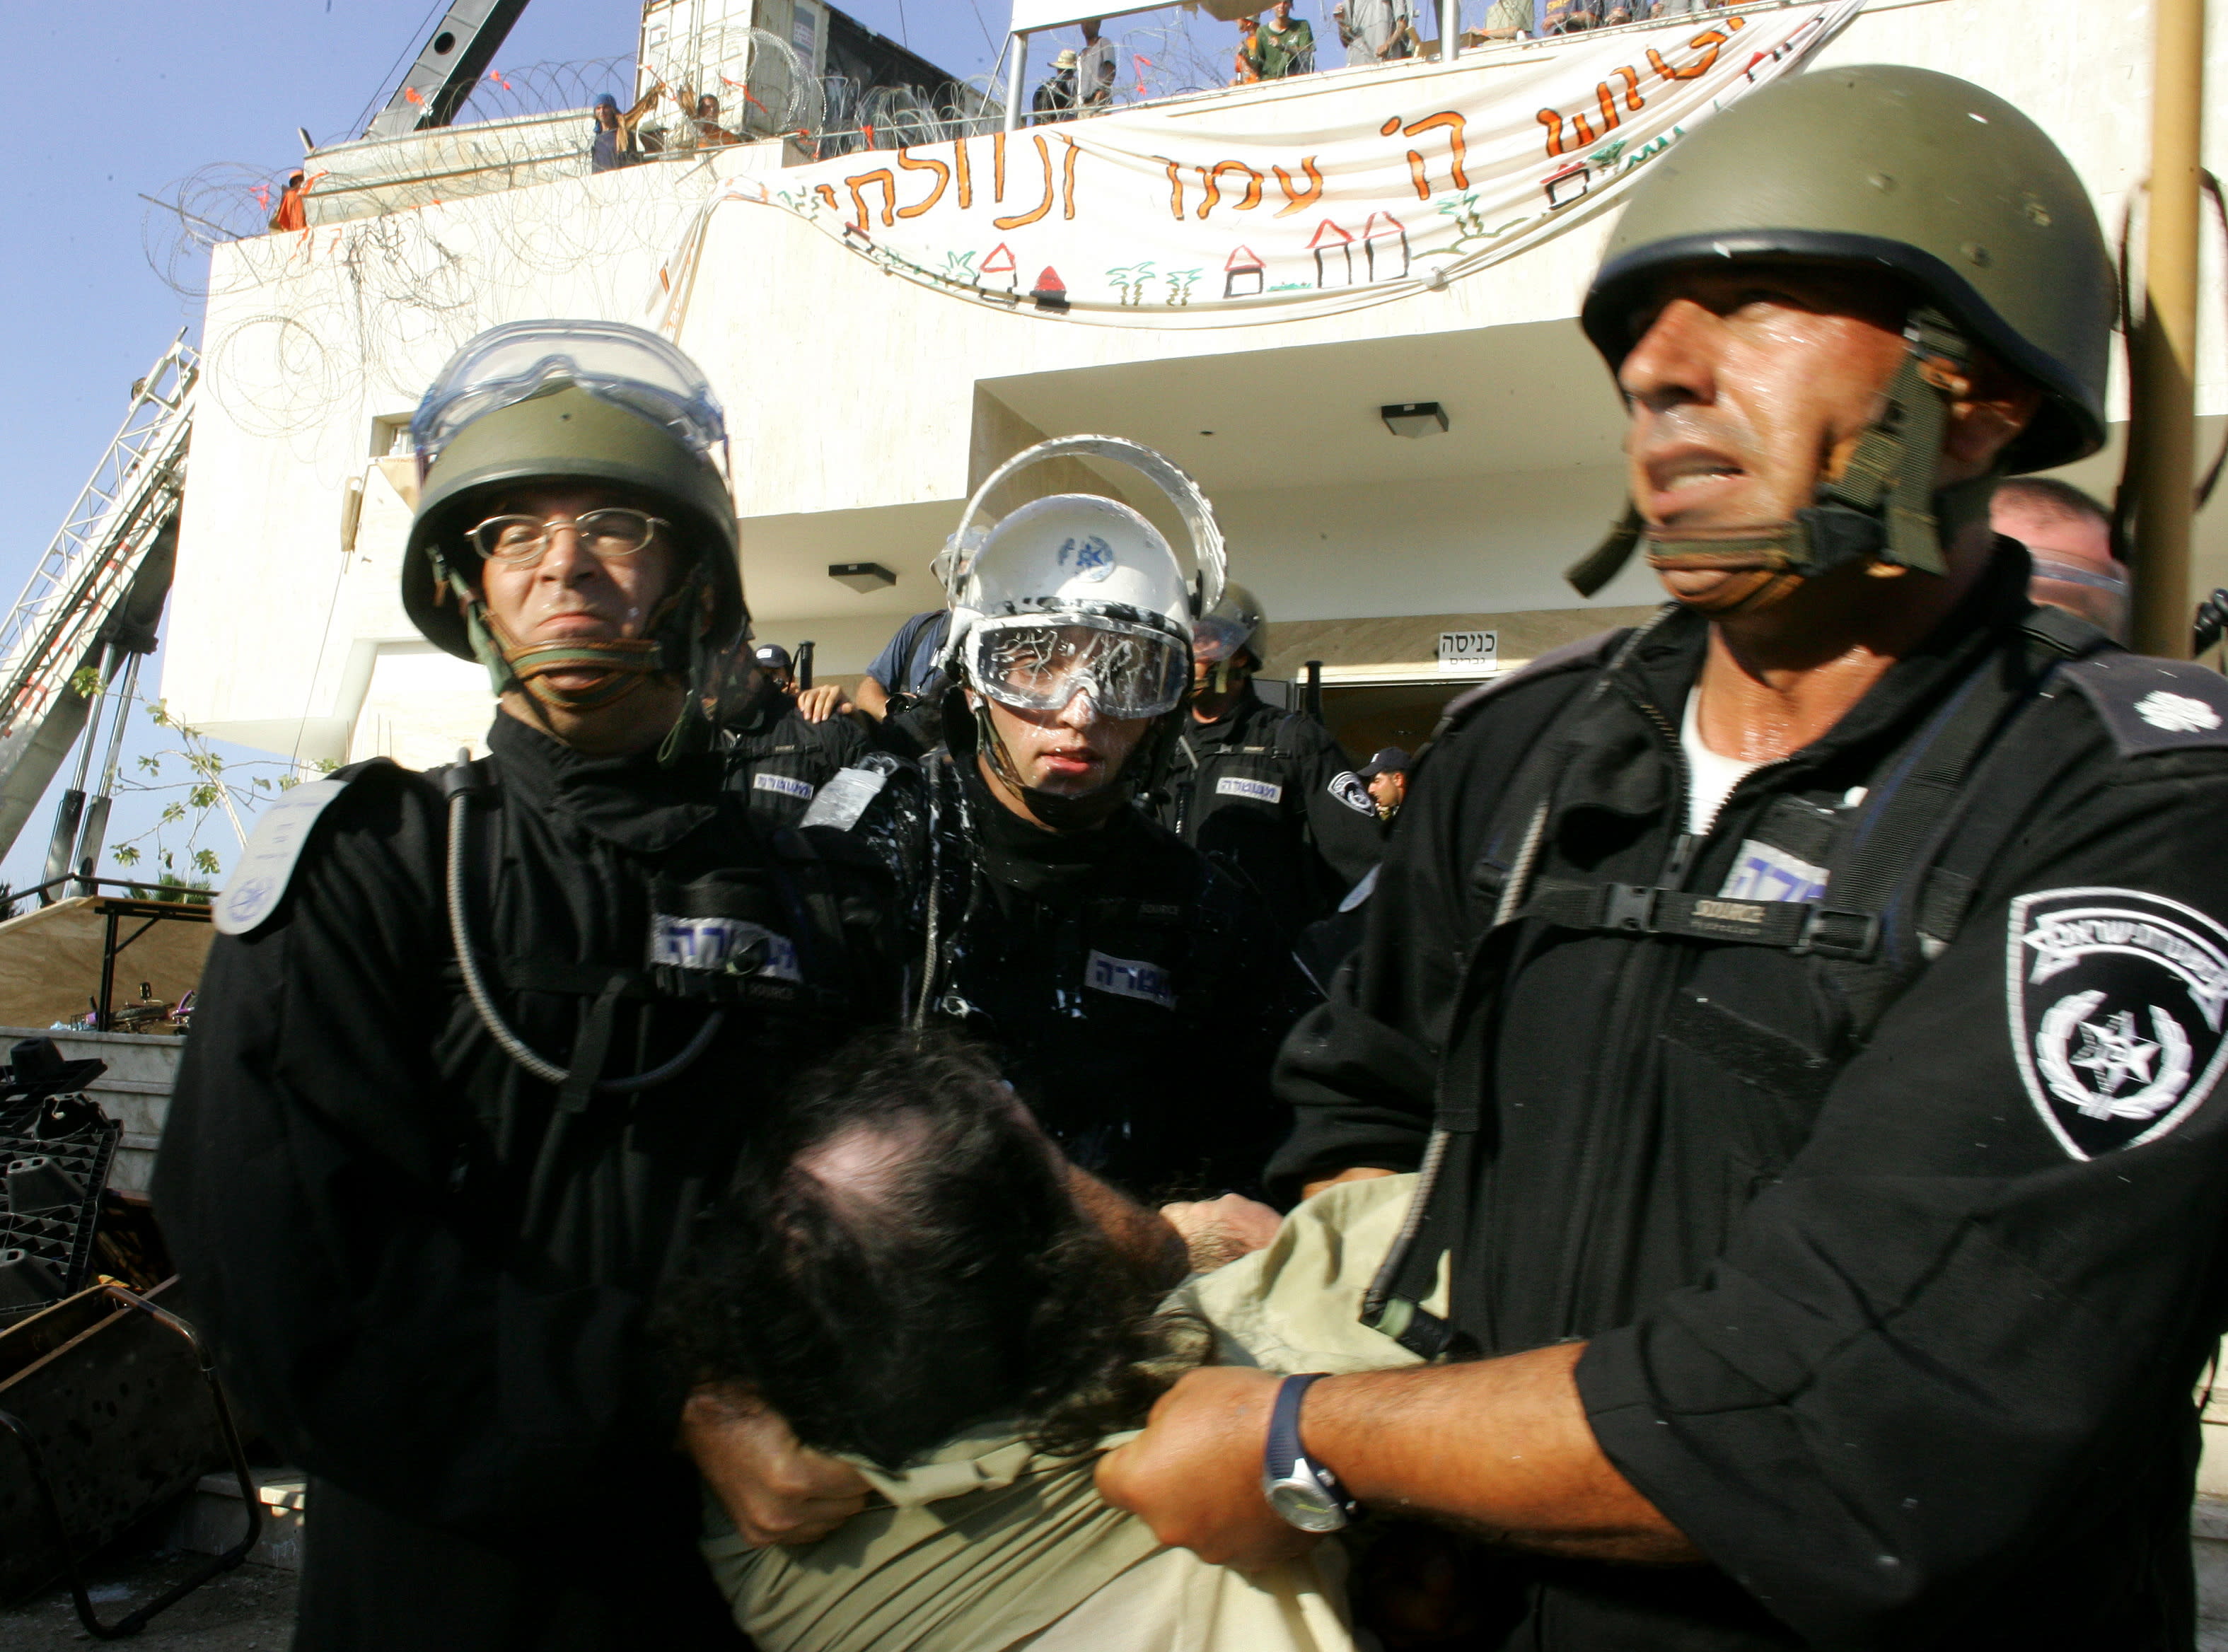 Israeli security forces drag a protester opposing Israel's disengagement plan from Gaza, in the Jewish settlement of Kfar Darom in the southern Gaza Strip, August 18, 2005 (Reuters)